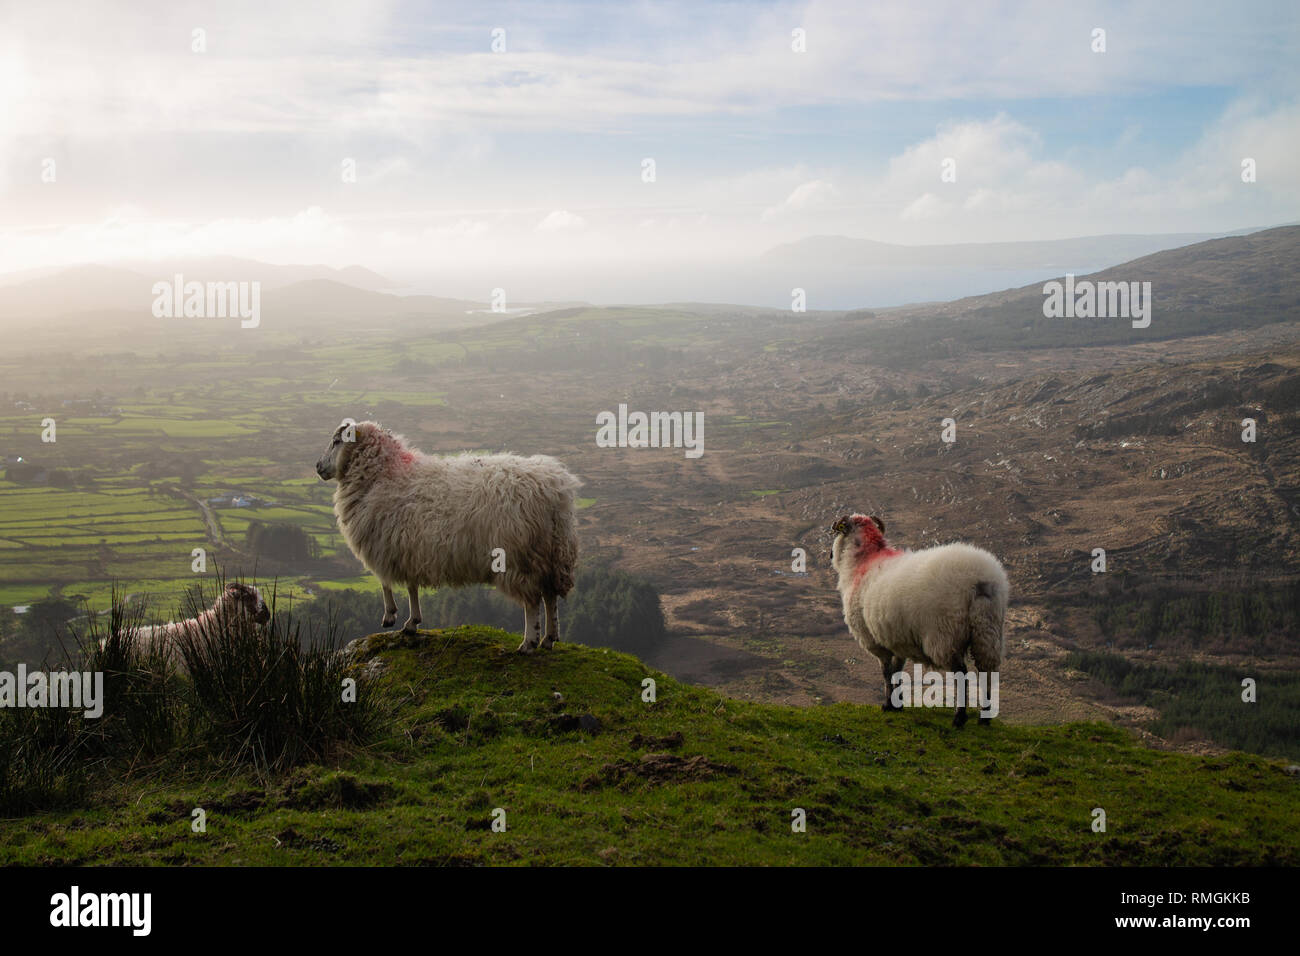 mixed breed sheep or ewes looking into a valley from a hilltop or summit Stock Photo